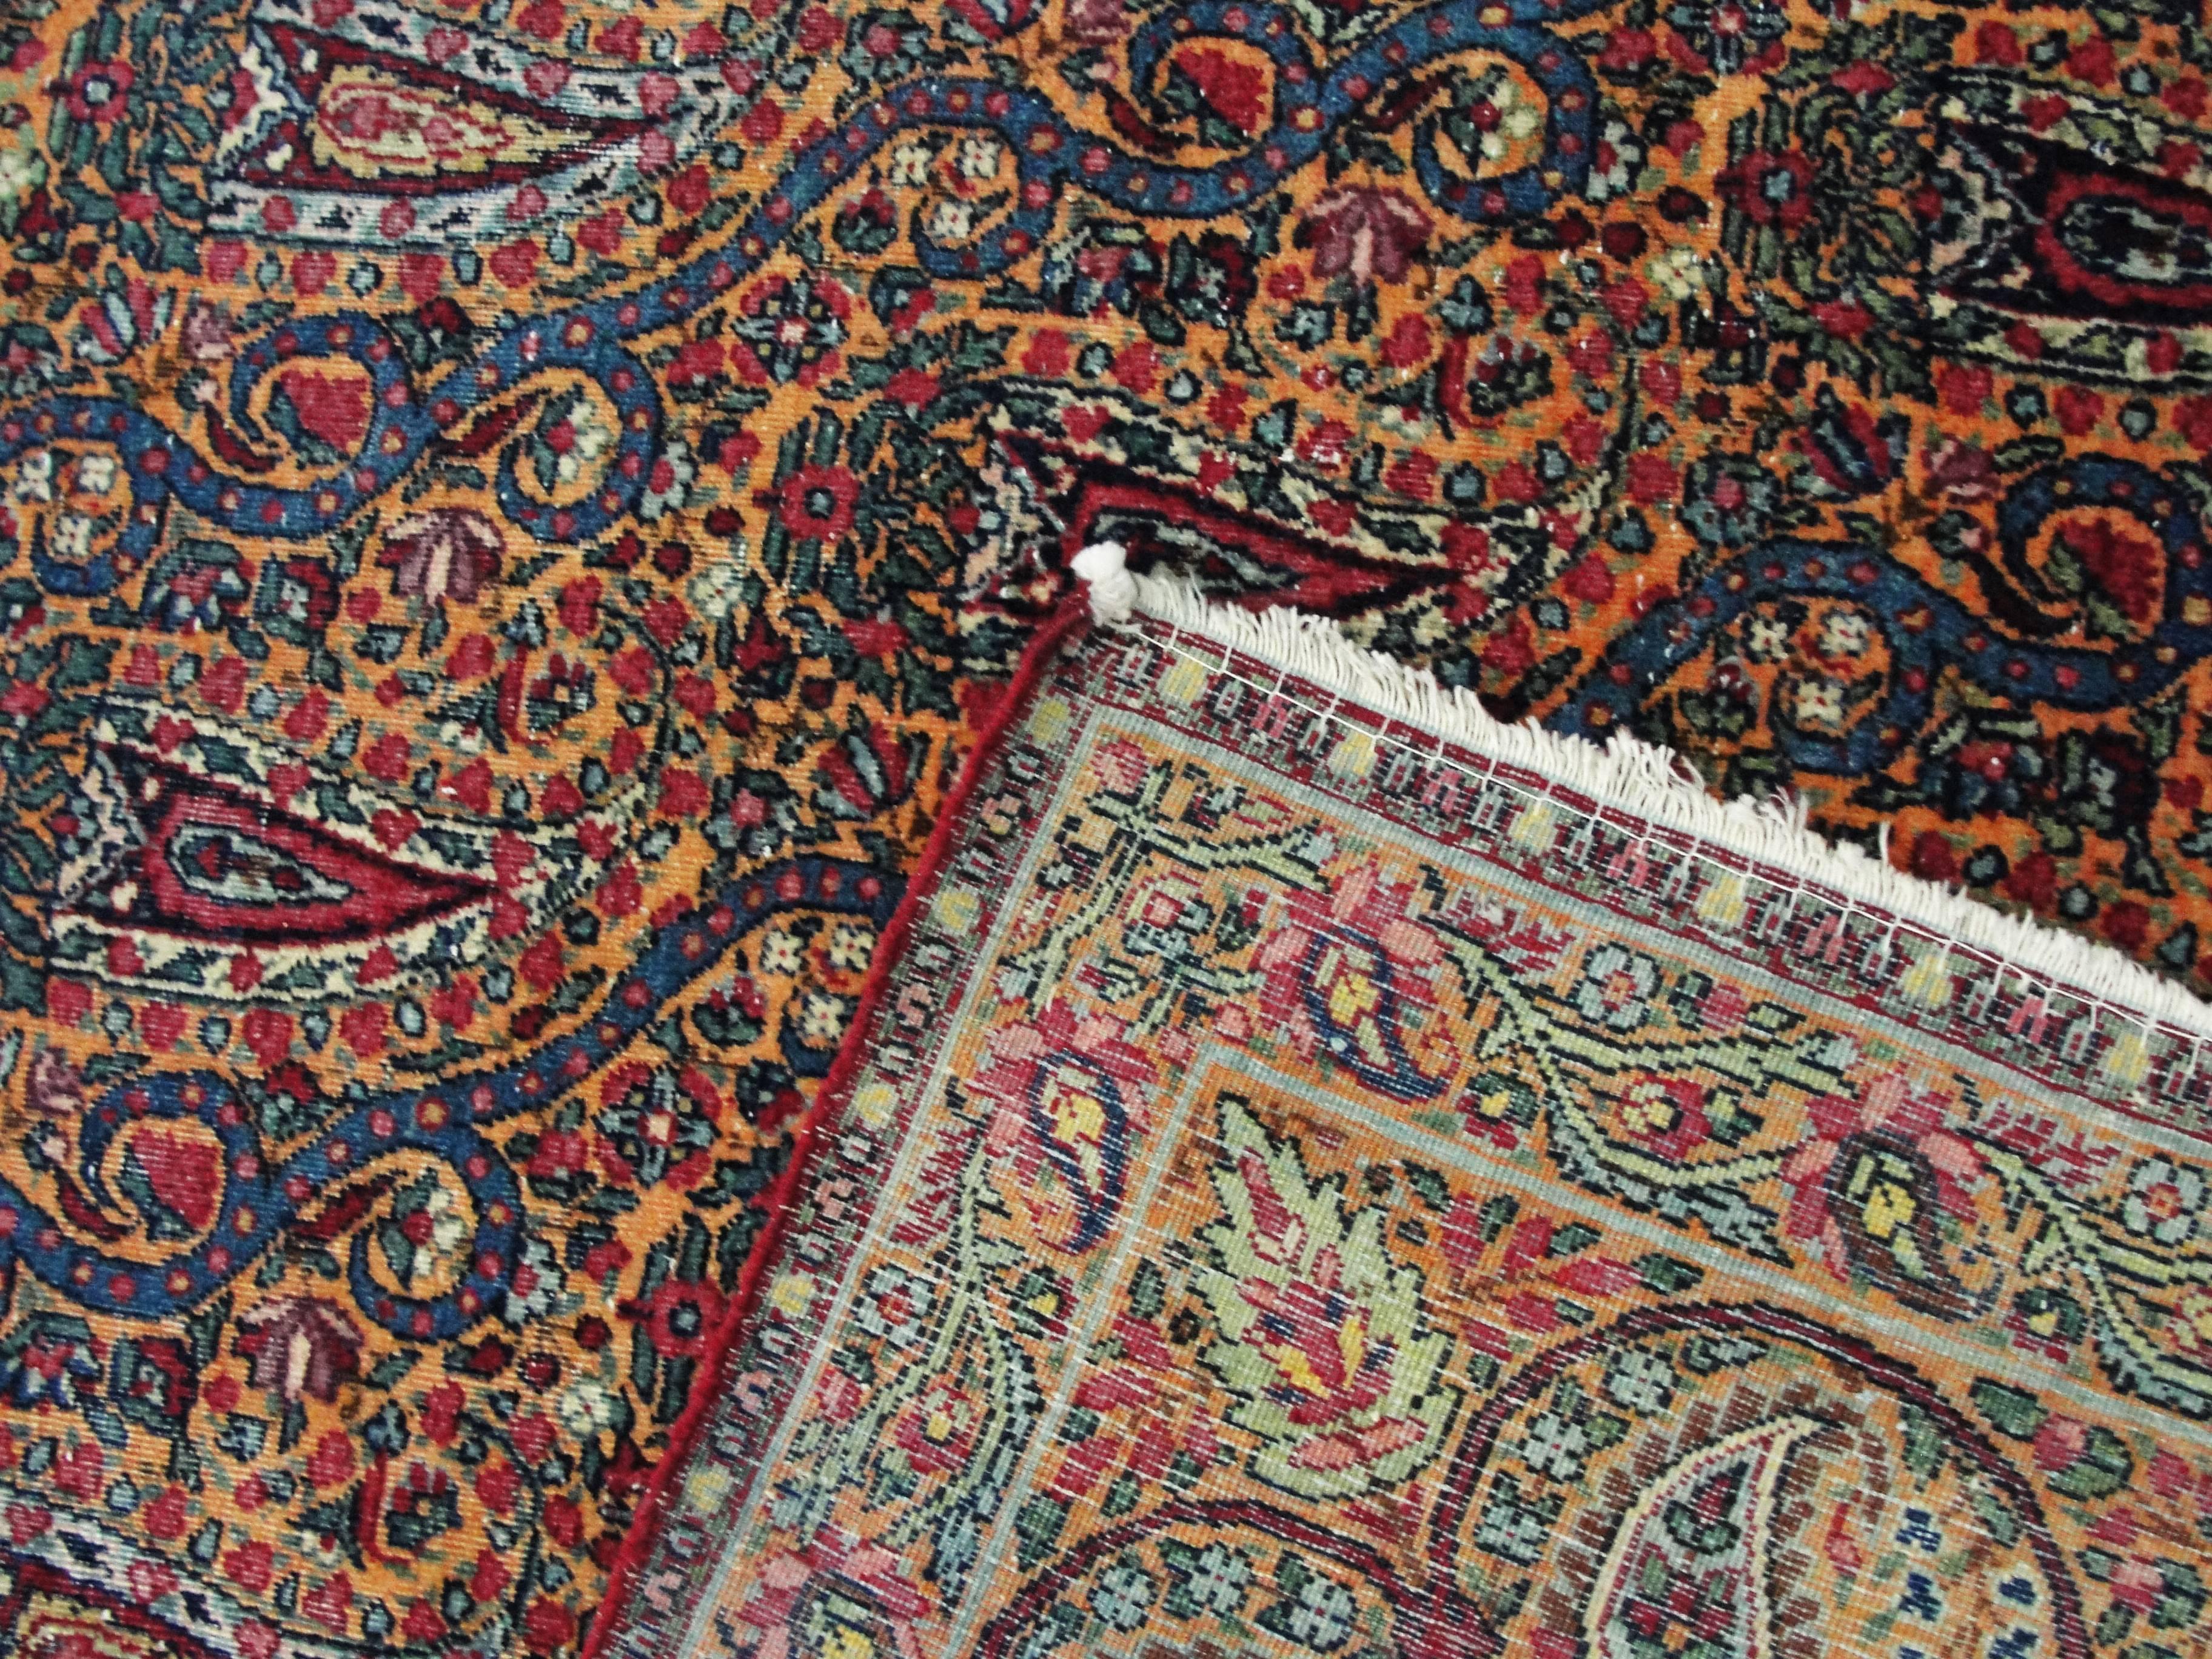 Ask for dealer shipping.
To the south east of Persia is the city of Kerman or Kirman and to the north of Kerman is the village of Laver or Raver which has a rug weaving history at least as long as that of Kerman. During the 1920s produce many rugs